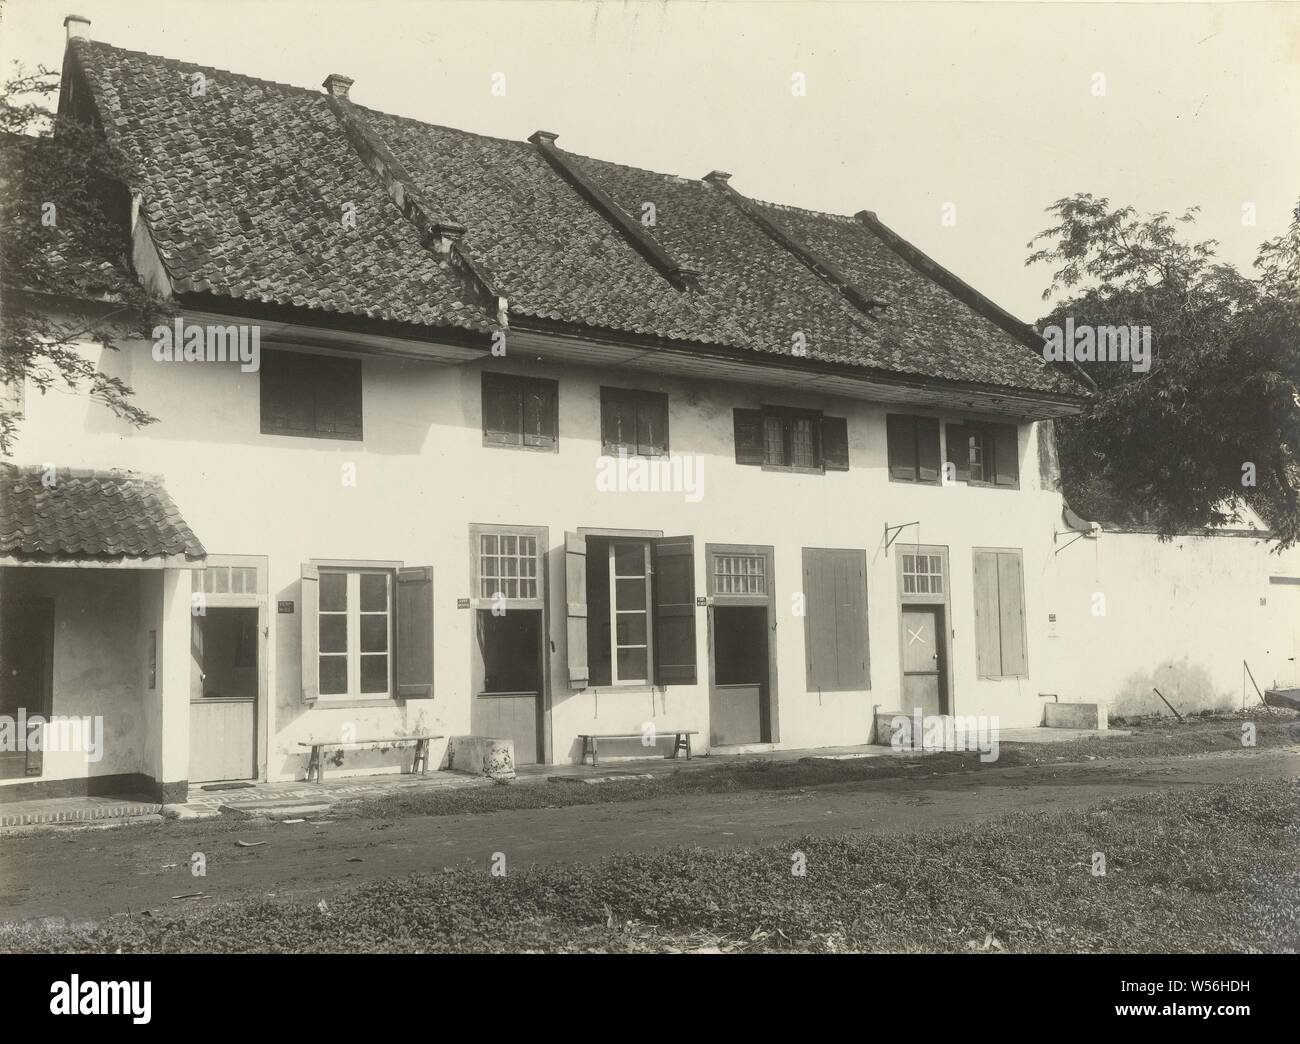 Dutch buildings in Batavia, One of six photos (black and white) of Dutch buildings and the Chinese district in Batavia (Jakarta), Dutch East Indies. Brands, reverse: stamp: 'chief of the archaeological service' and weapon of the Netherlands, Oudheidkundige dienst, Batavia, c. 1900, paper, h 17 cm × w 23 cm Stock Photo